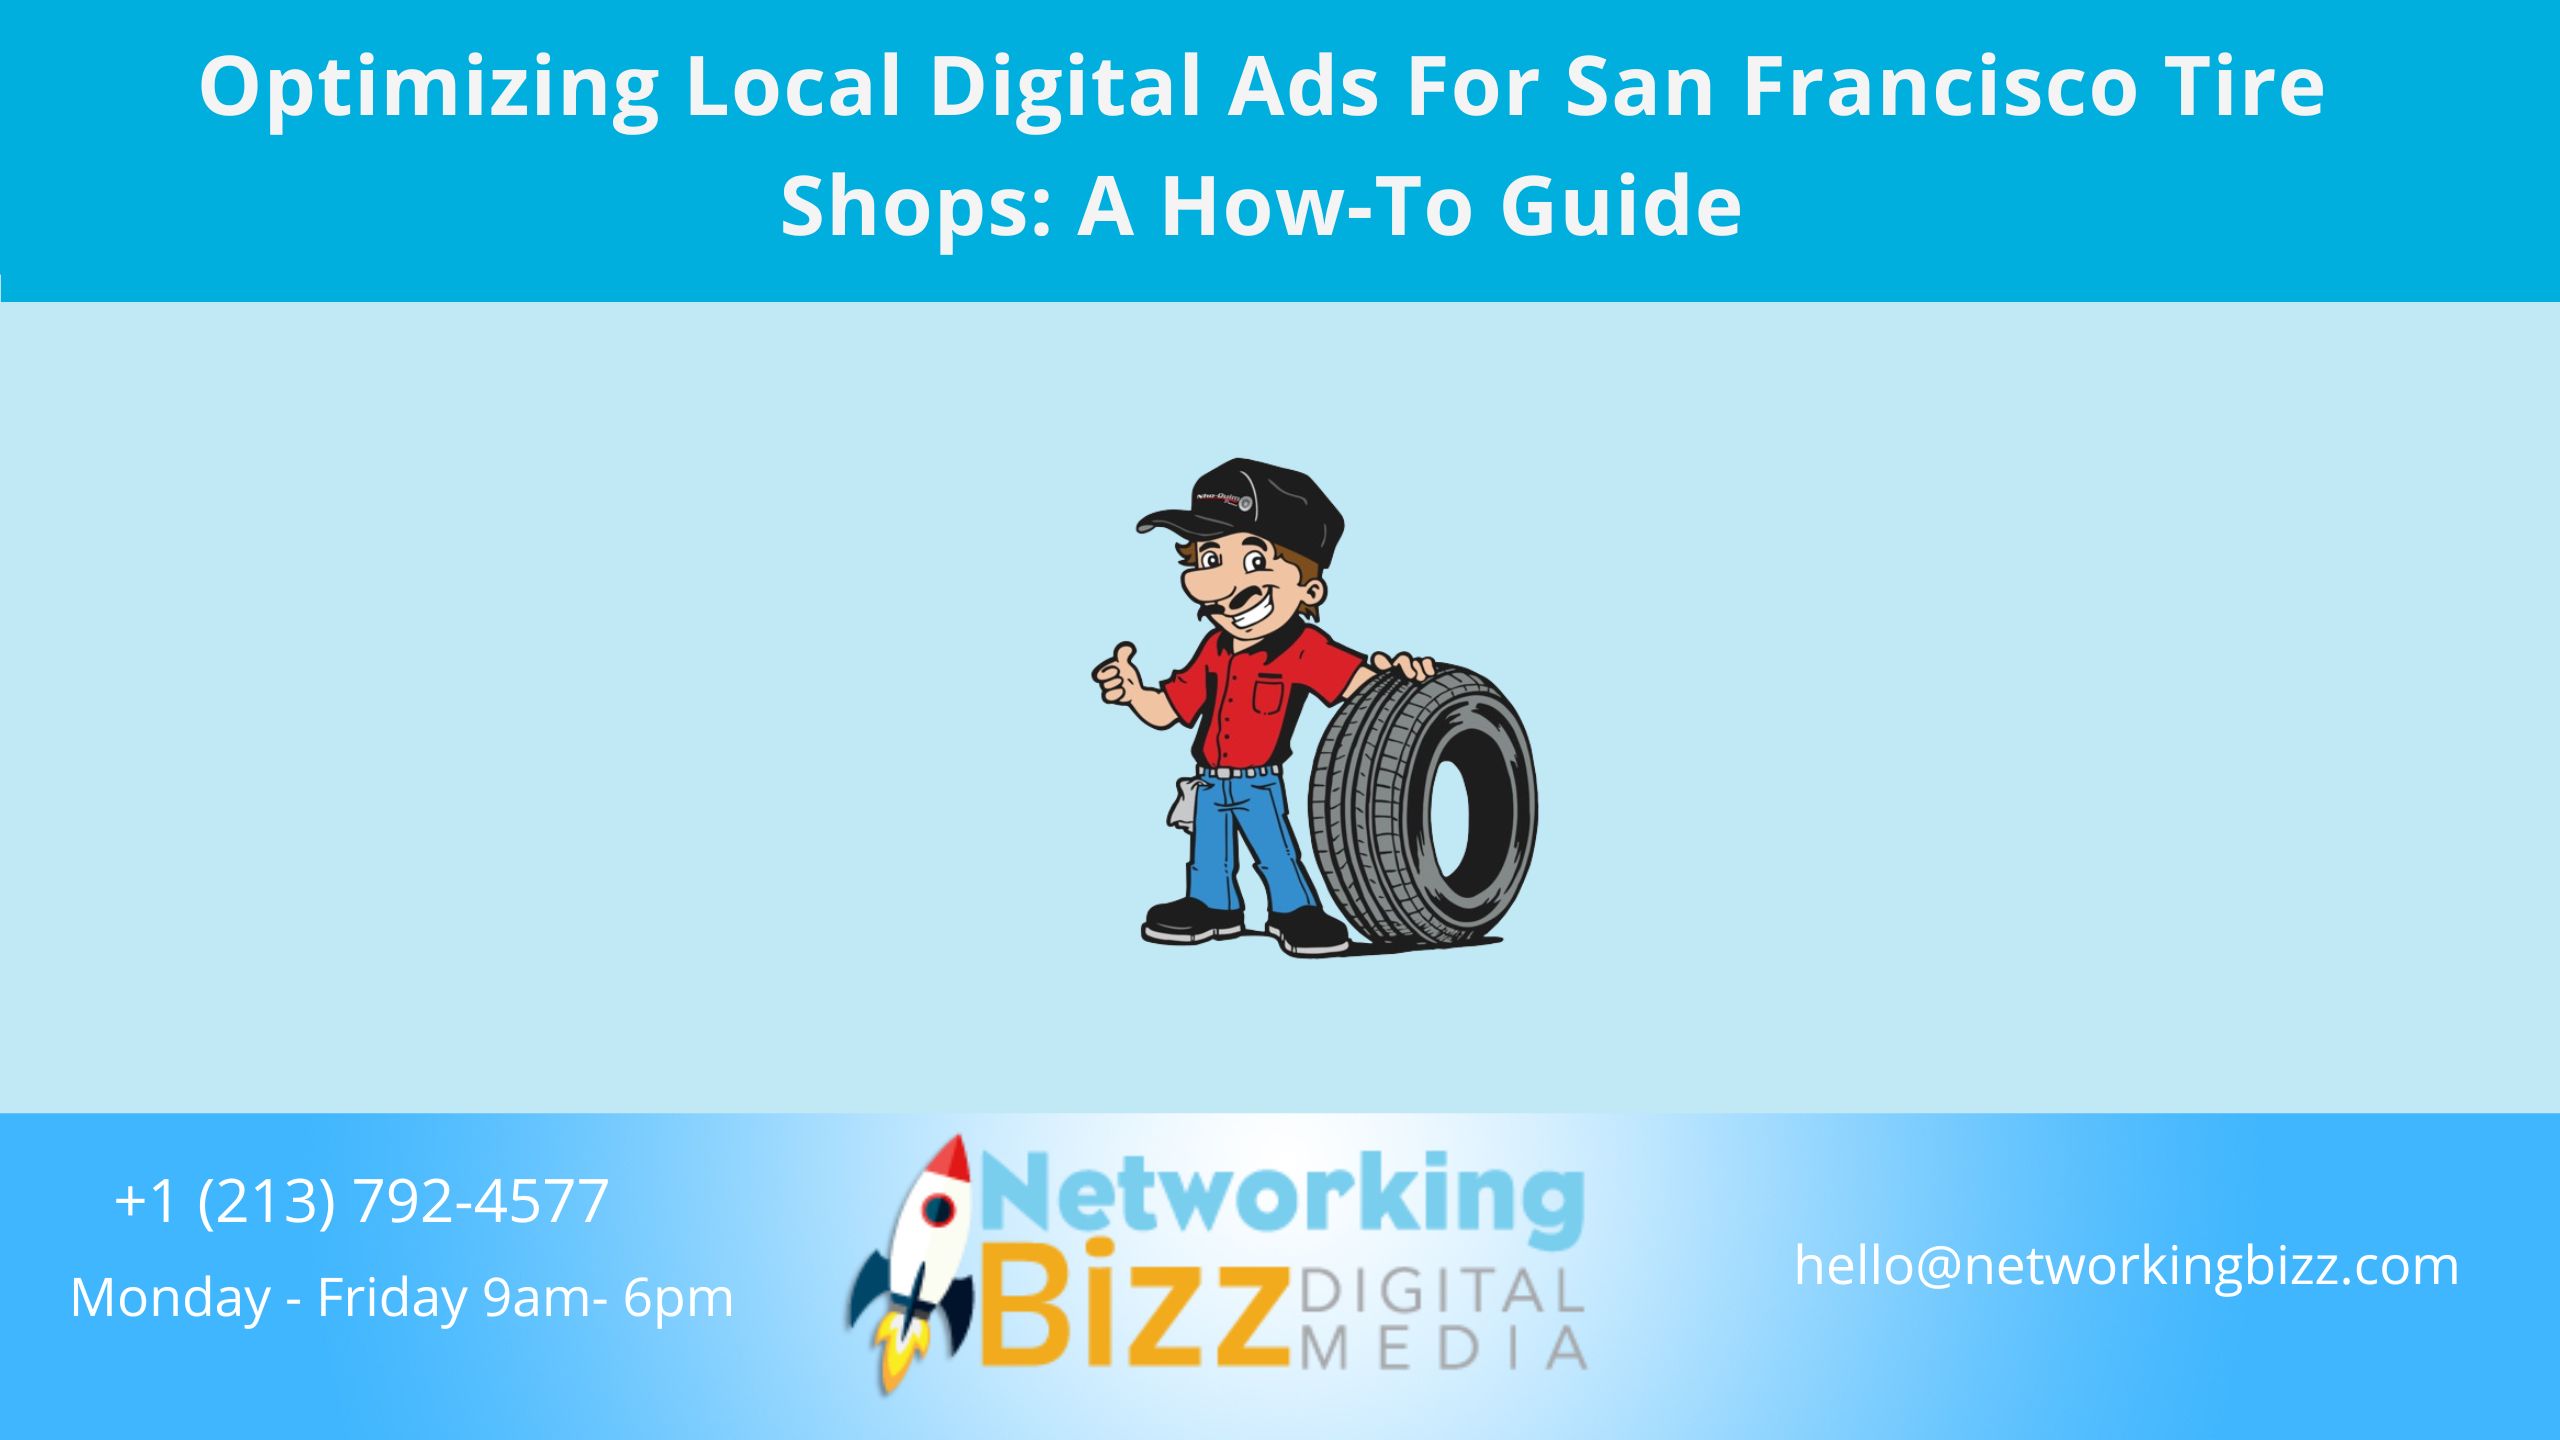 Optimizing Local Digital Ads For San Francisco Tire Shops: A How-To Guide